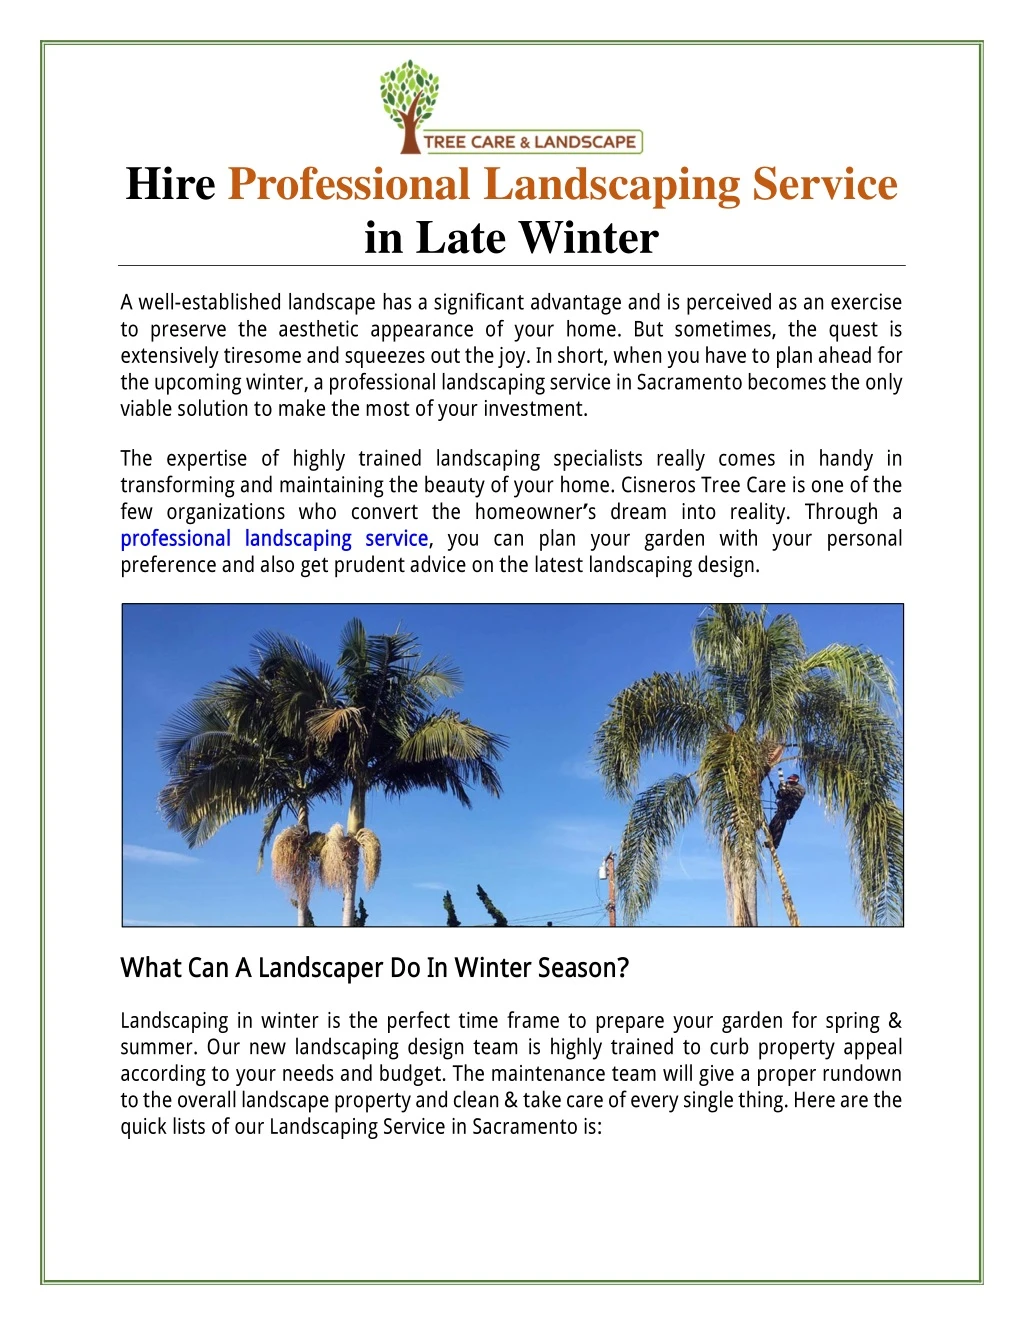 hire professional landscaping service in late